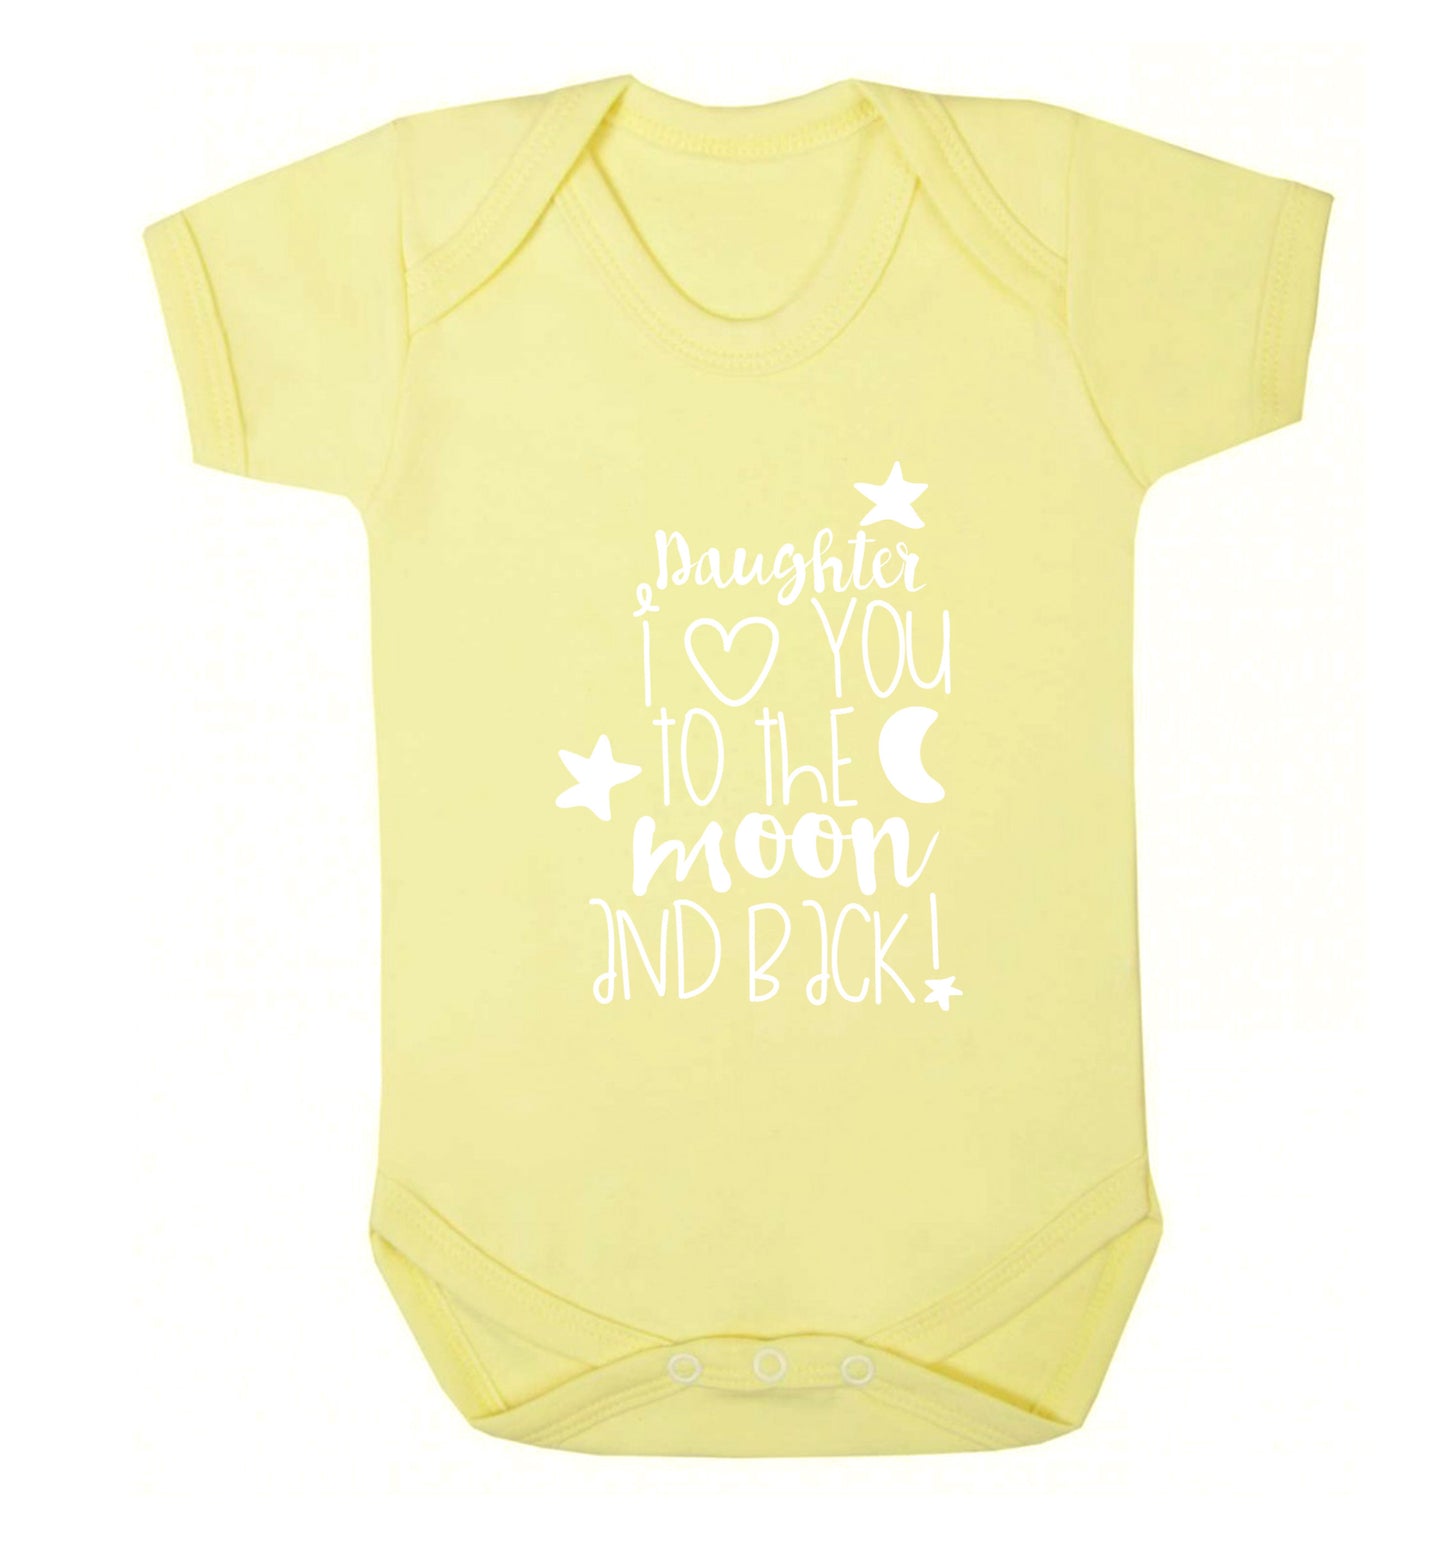 Daughter I love you to the moon and back Baby Vest pale yellow 18-24 months